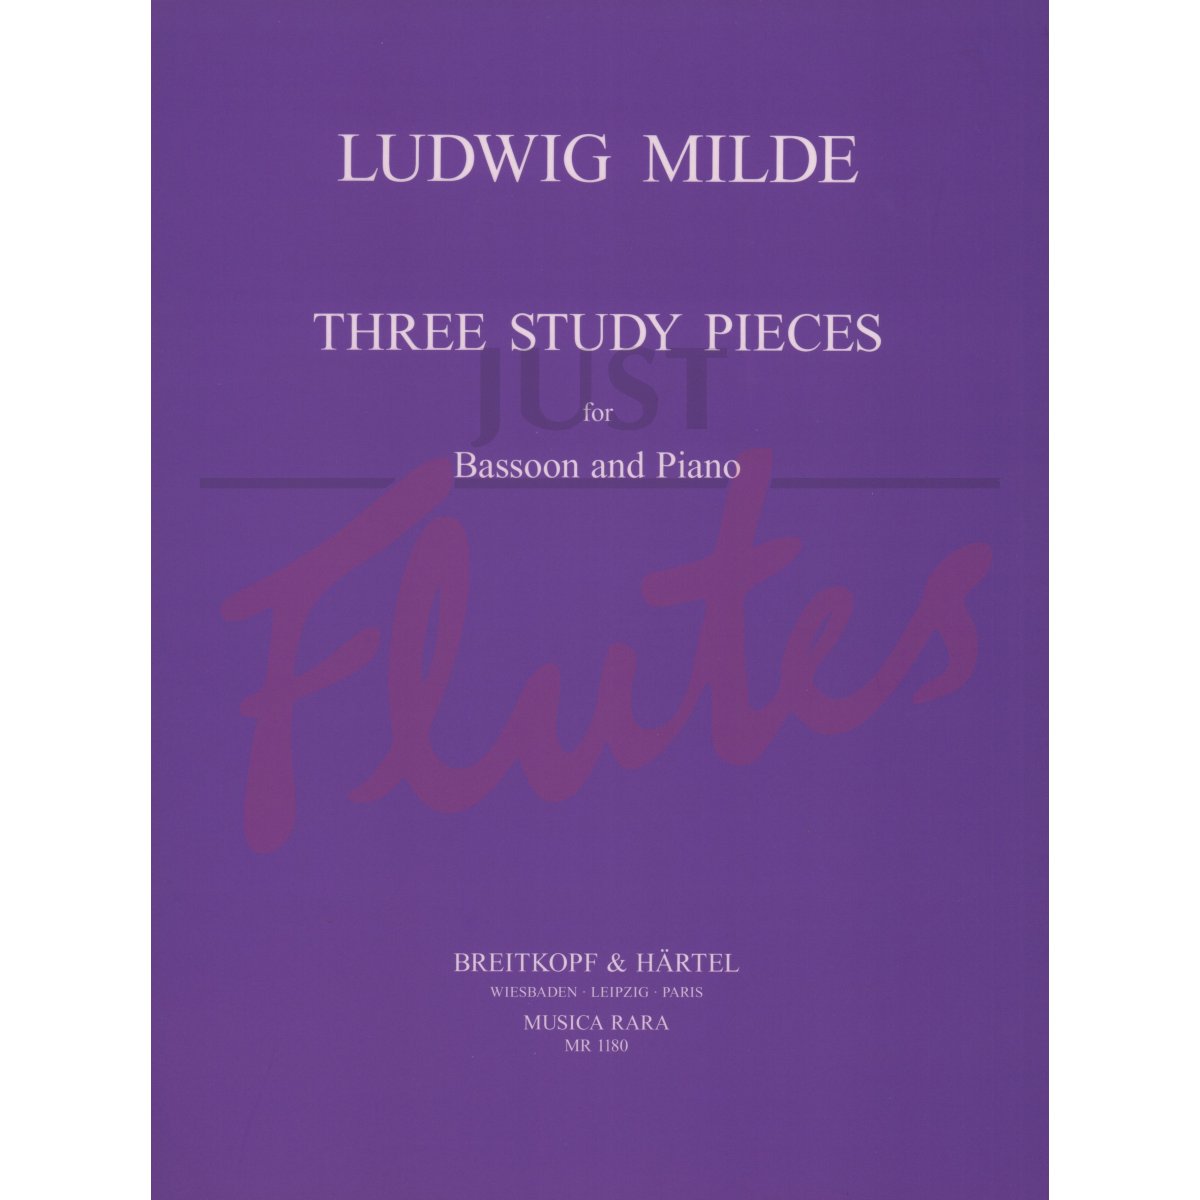 Three Study Pieces for Bassoon and Piano